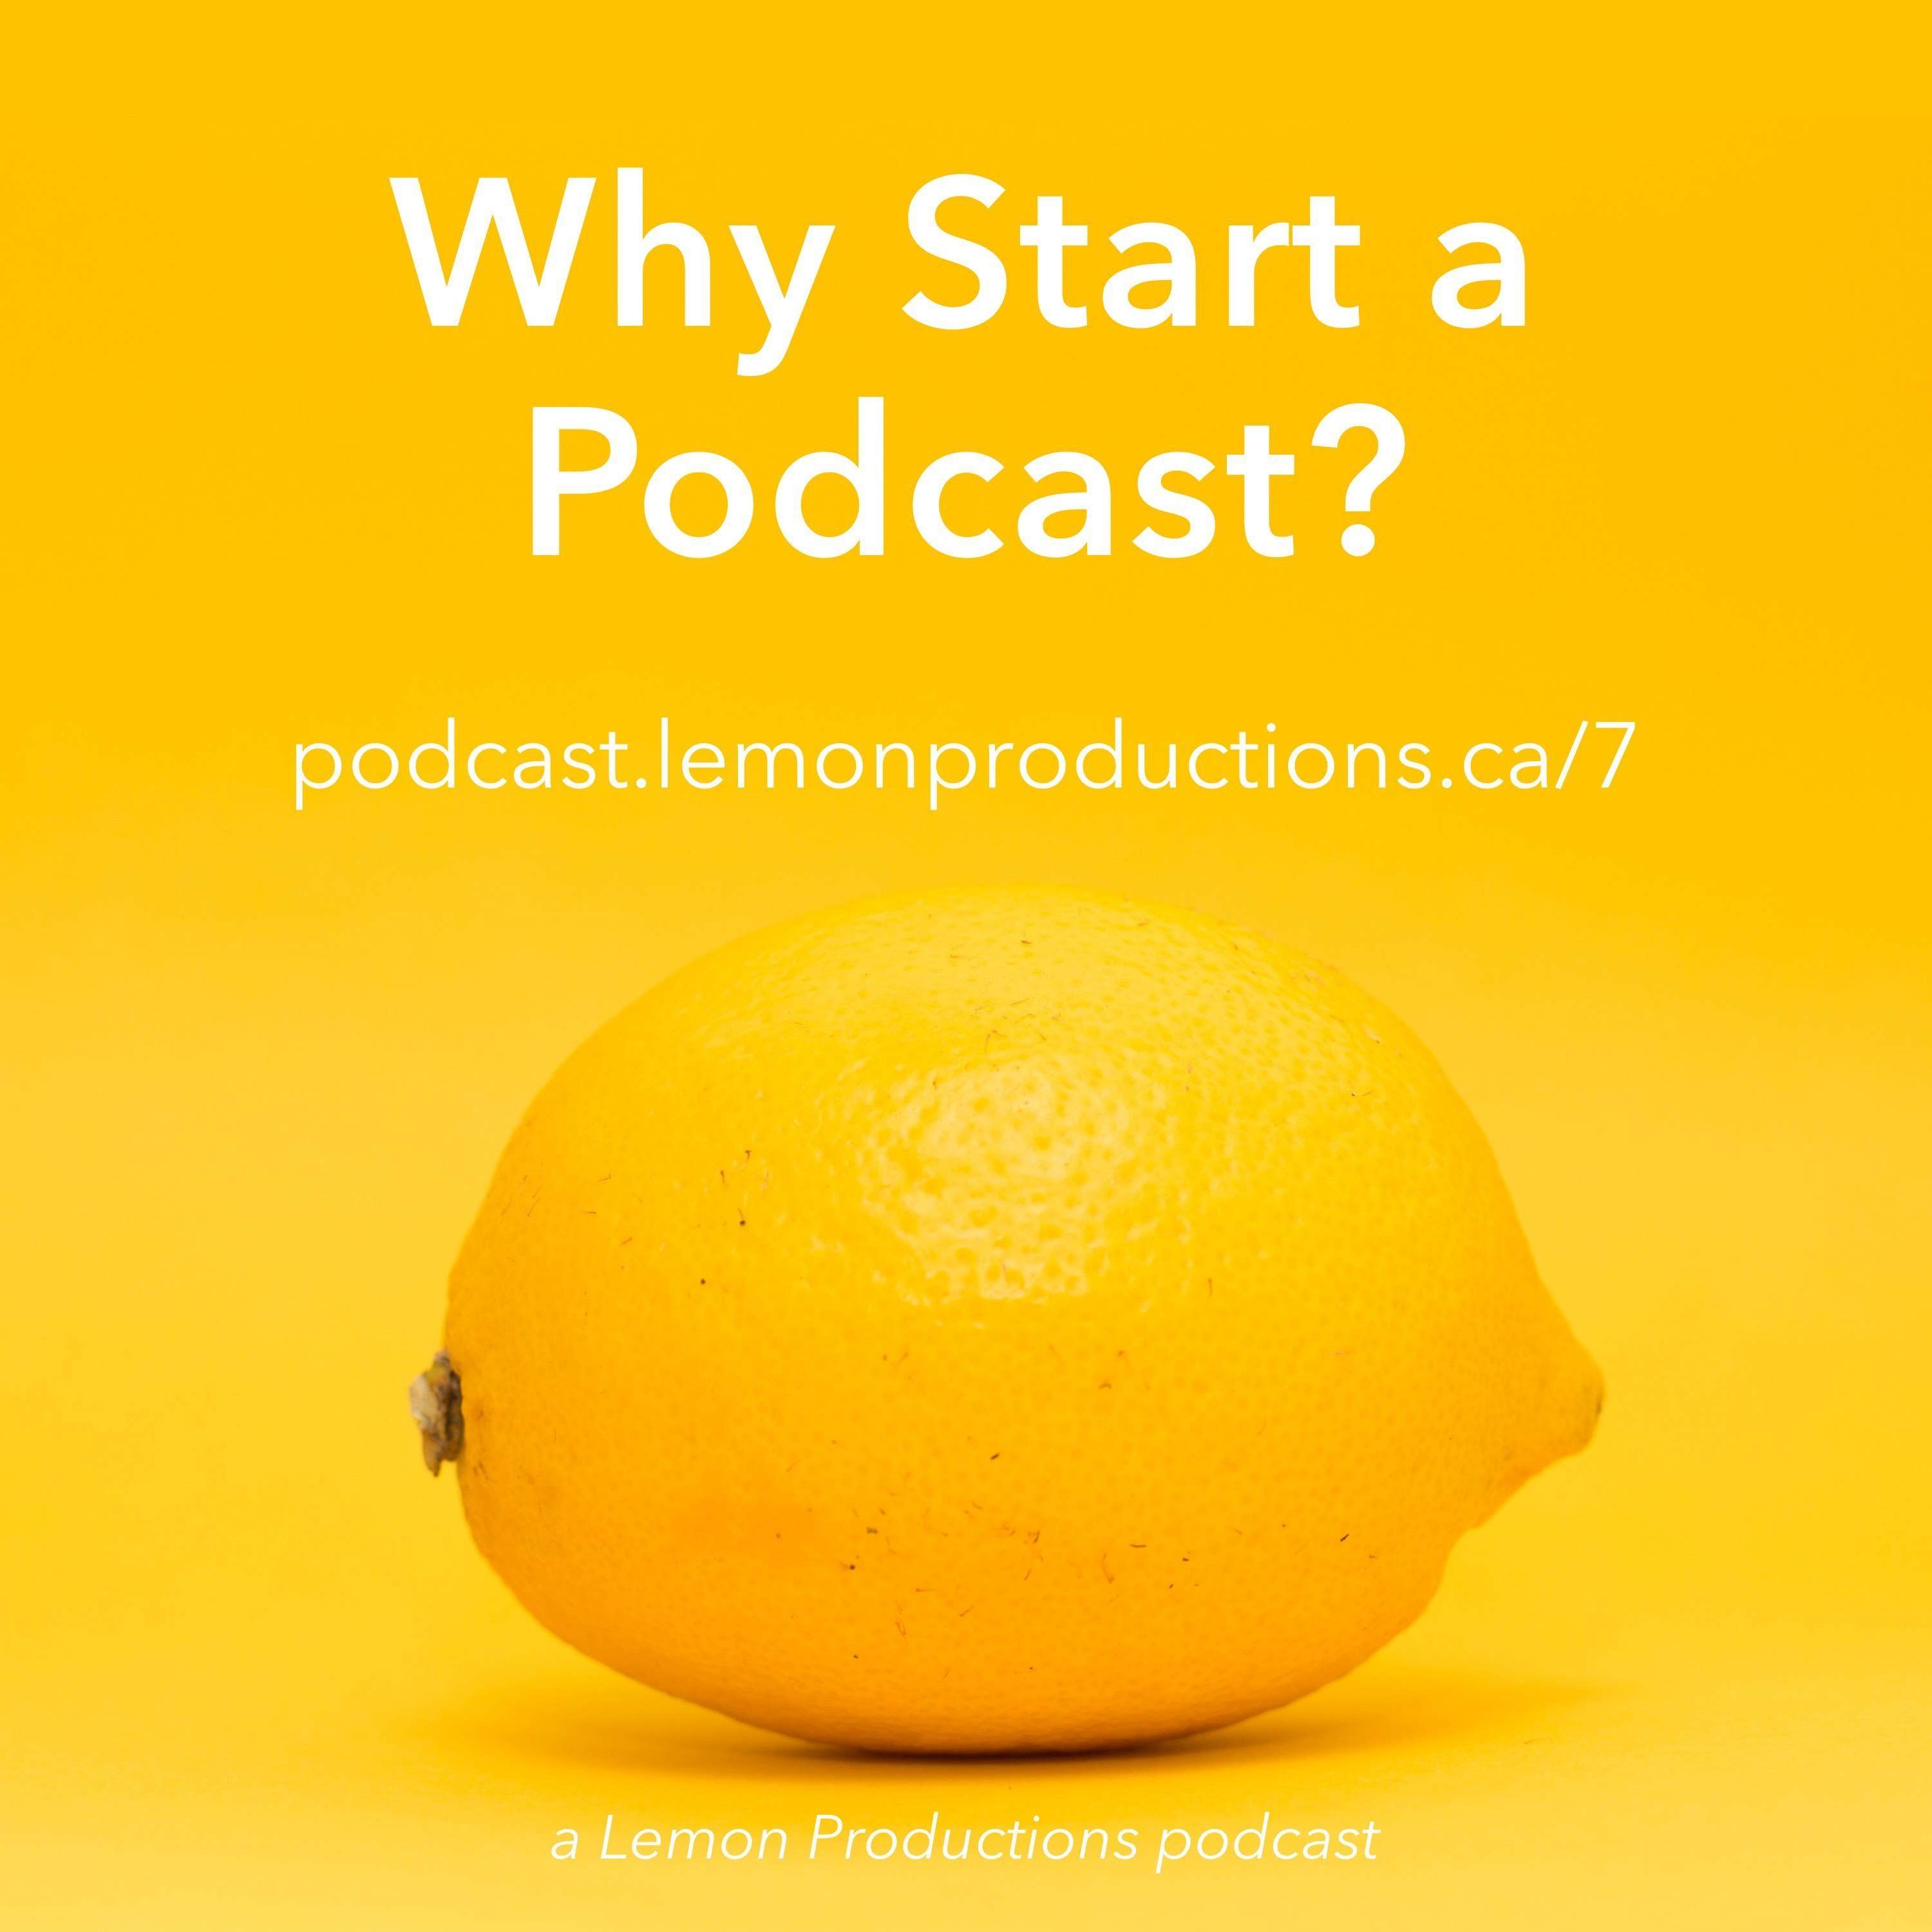 Why Start a Podcast?